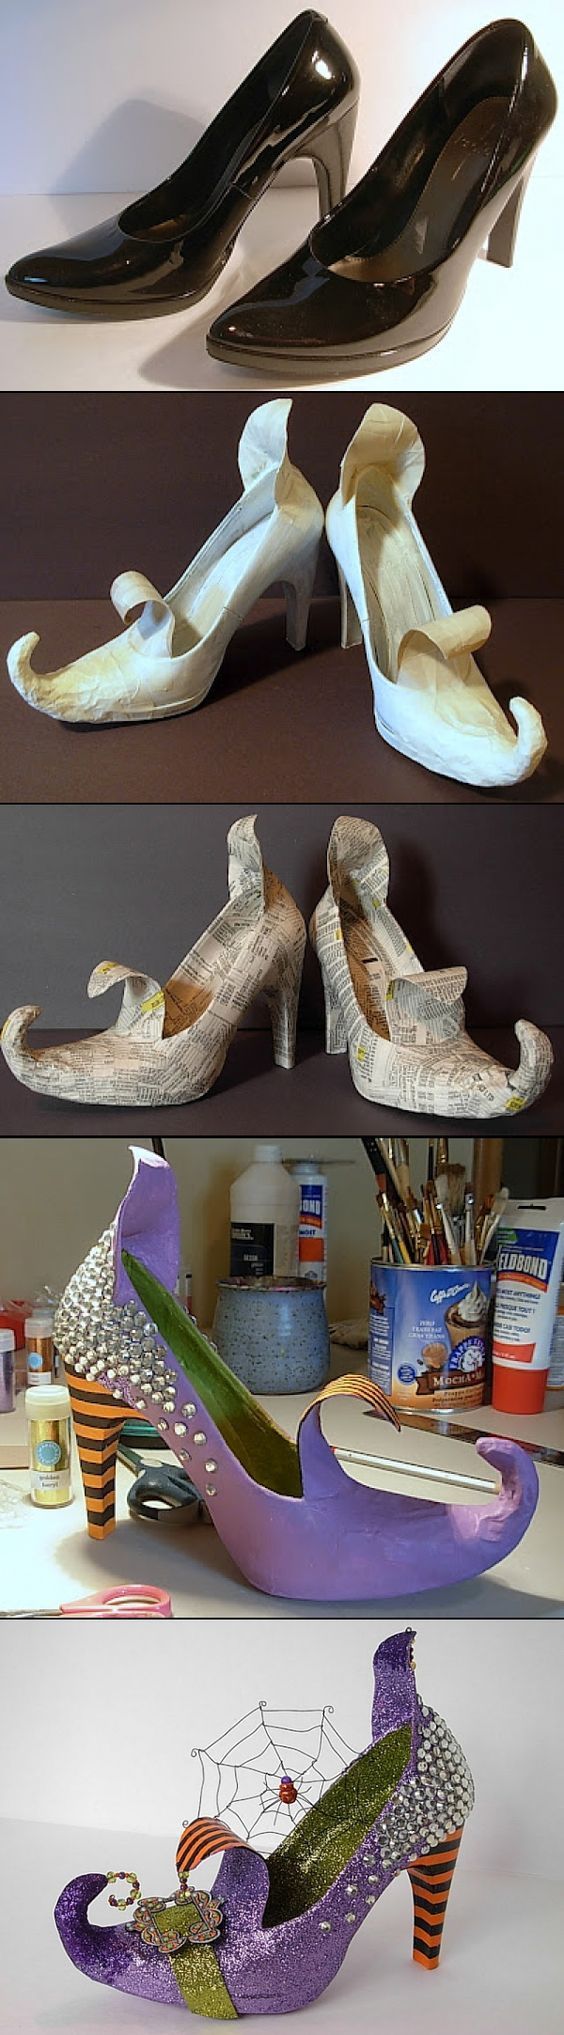 Make the coolest most wicked WITCH shoes from an old pair of your heels! | Dale detalles – Spooktacular Halloween DIYs, Crafts and